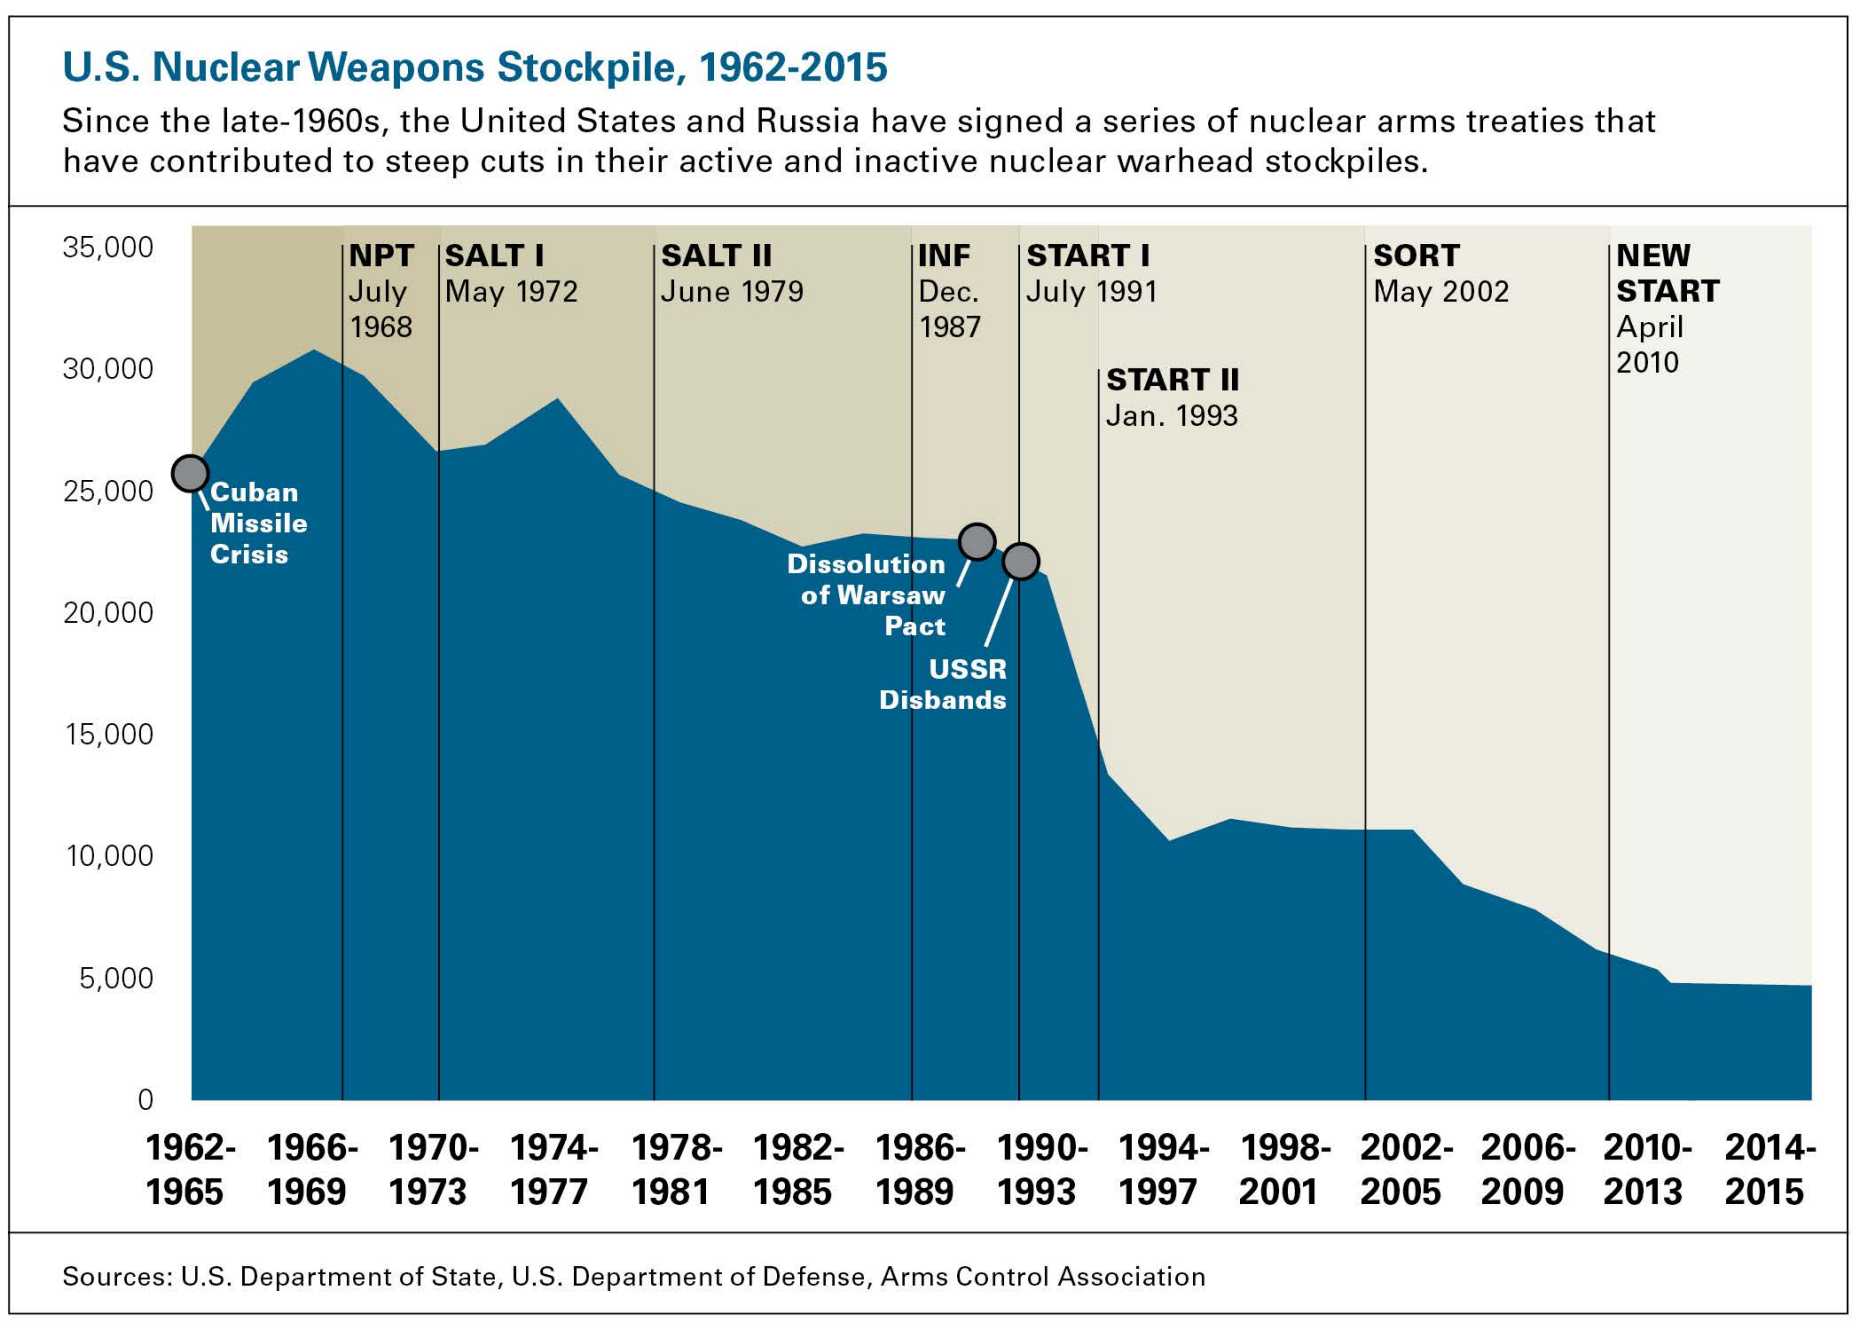 US Nuclear Weapons Stockpile, 1962-2015